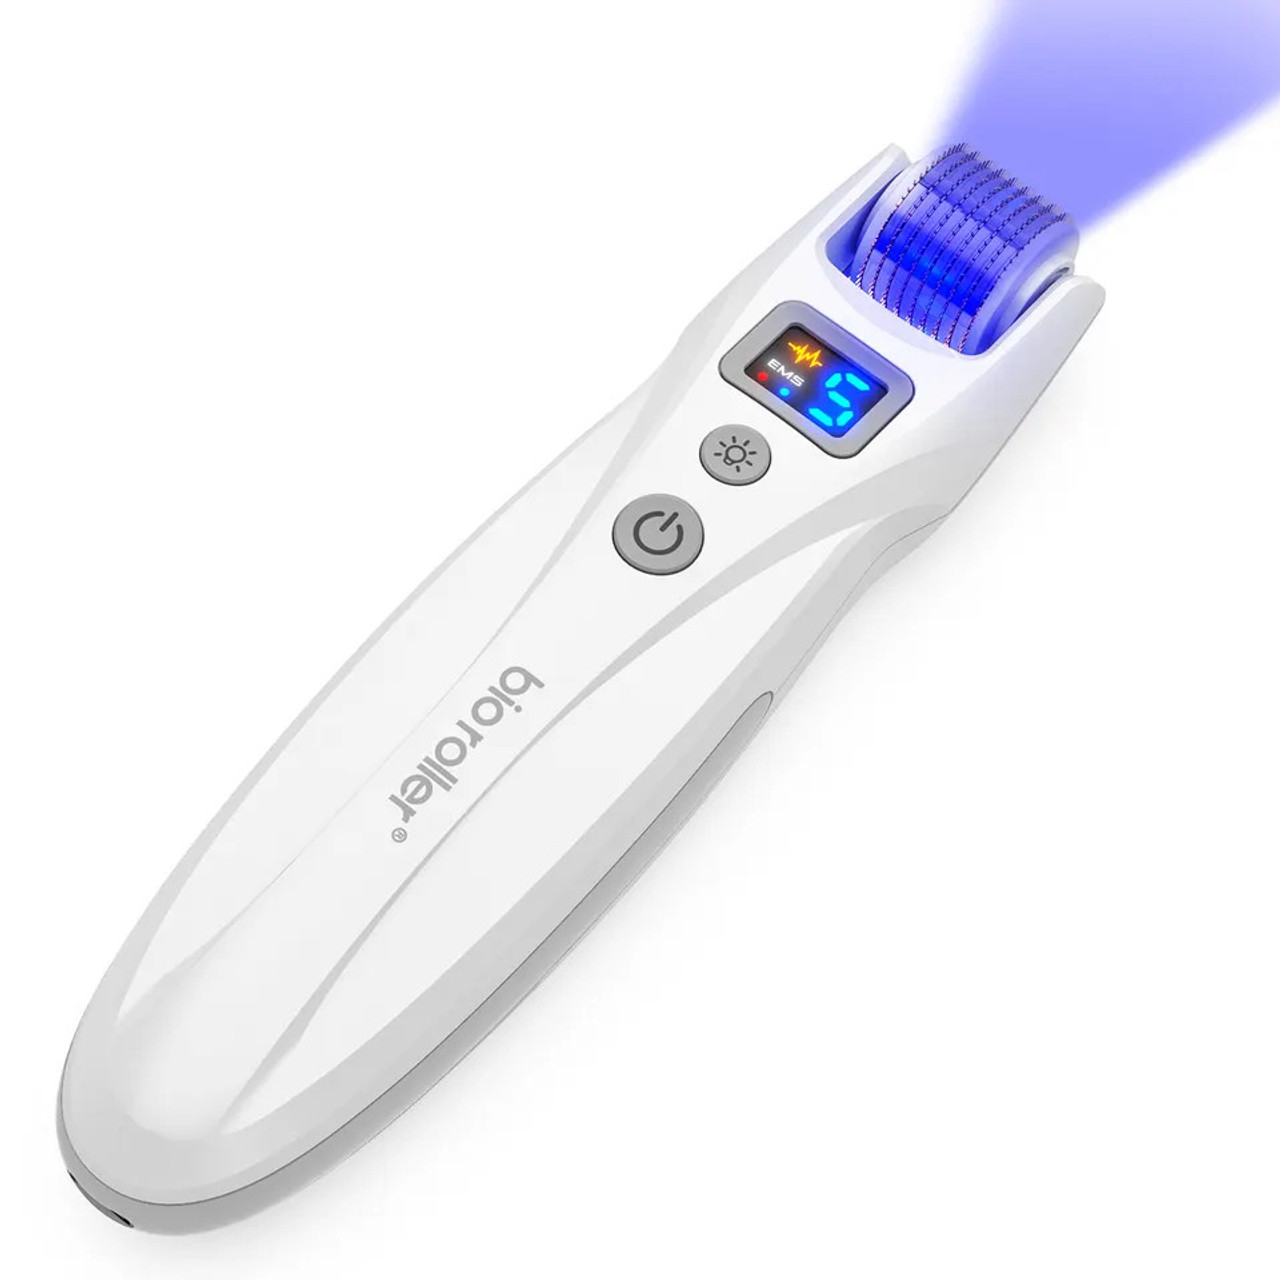 https://cdn11.bigcommerce.com/s-m2jwxwovny/images/stencil/1280x1280/products/112/382/bio-roller-g5-by-dr-pen-ems-led-micro-current-roller-getglowing-skincare__86448__66133.1695067190.jpg?c=1